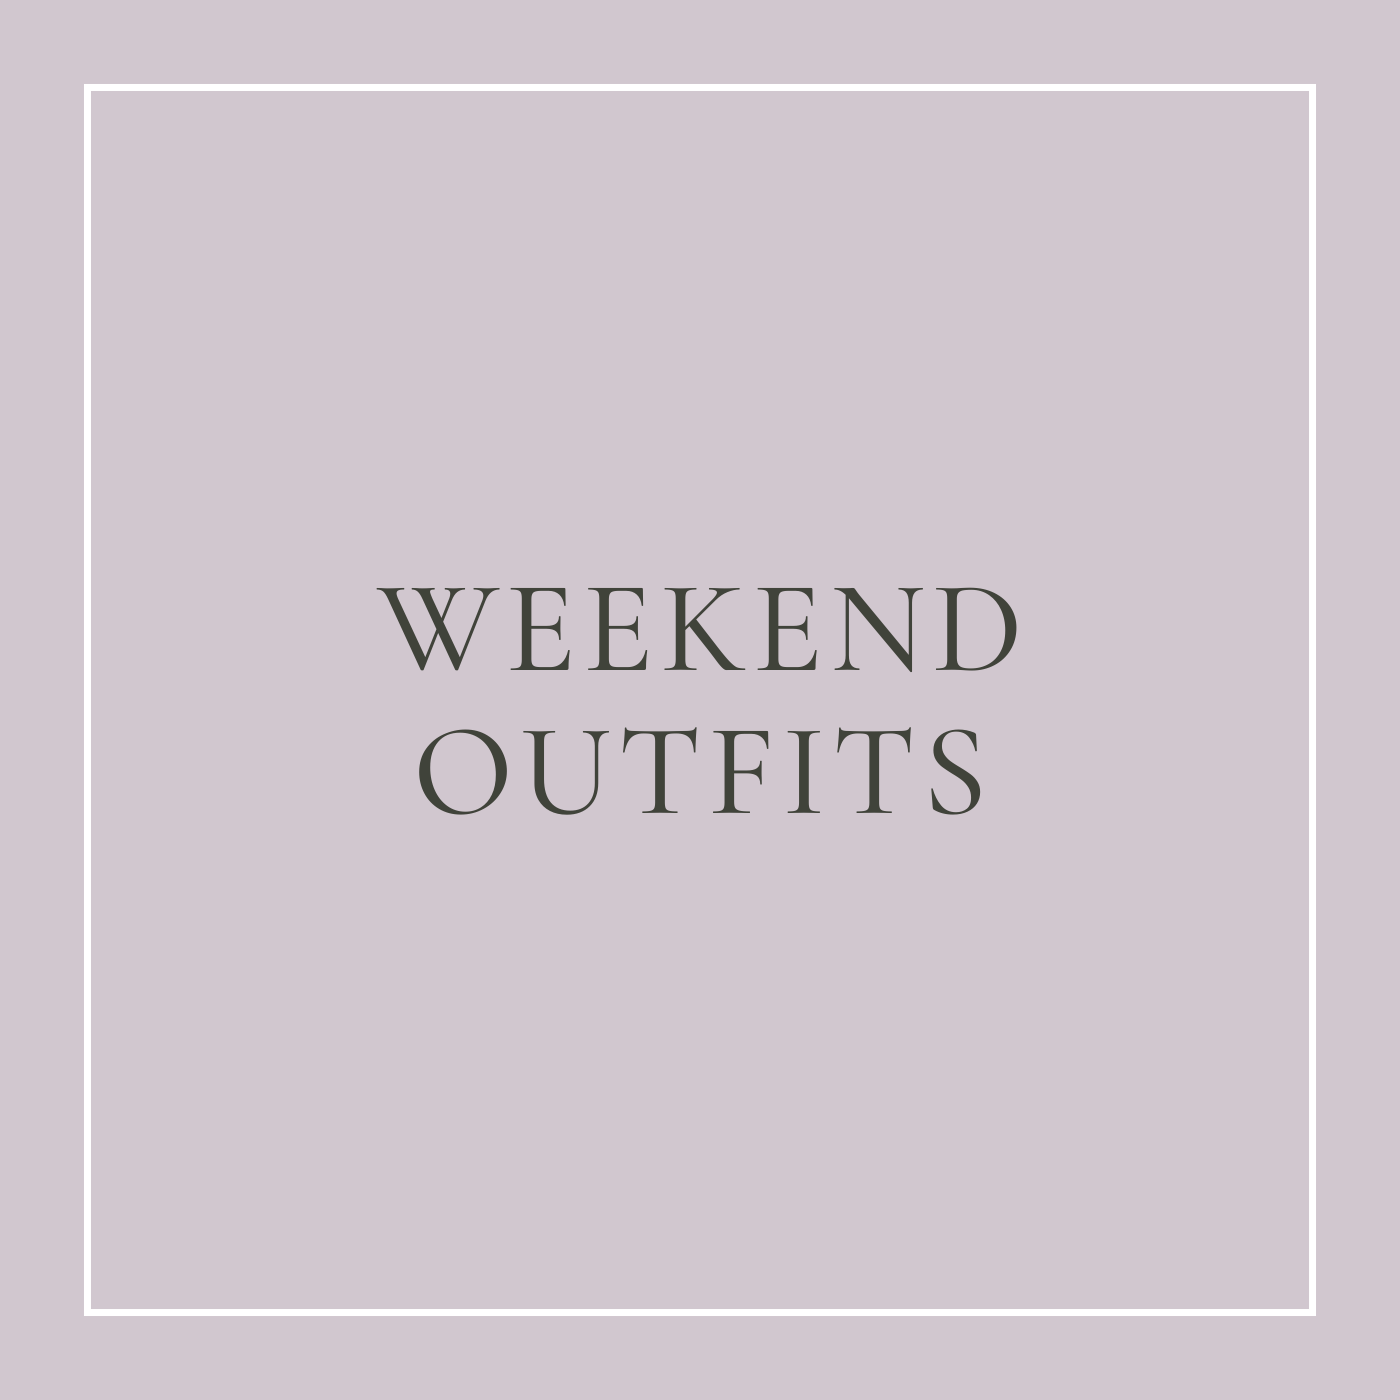 Weekend Outfits